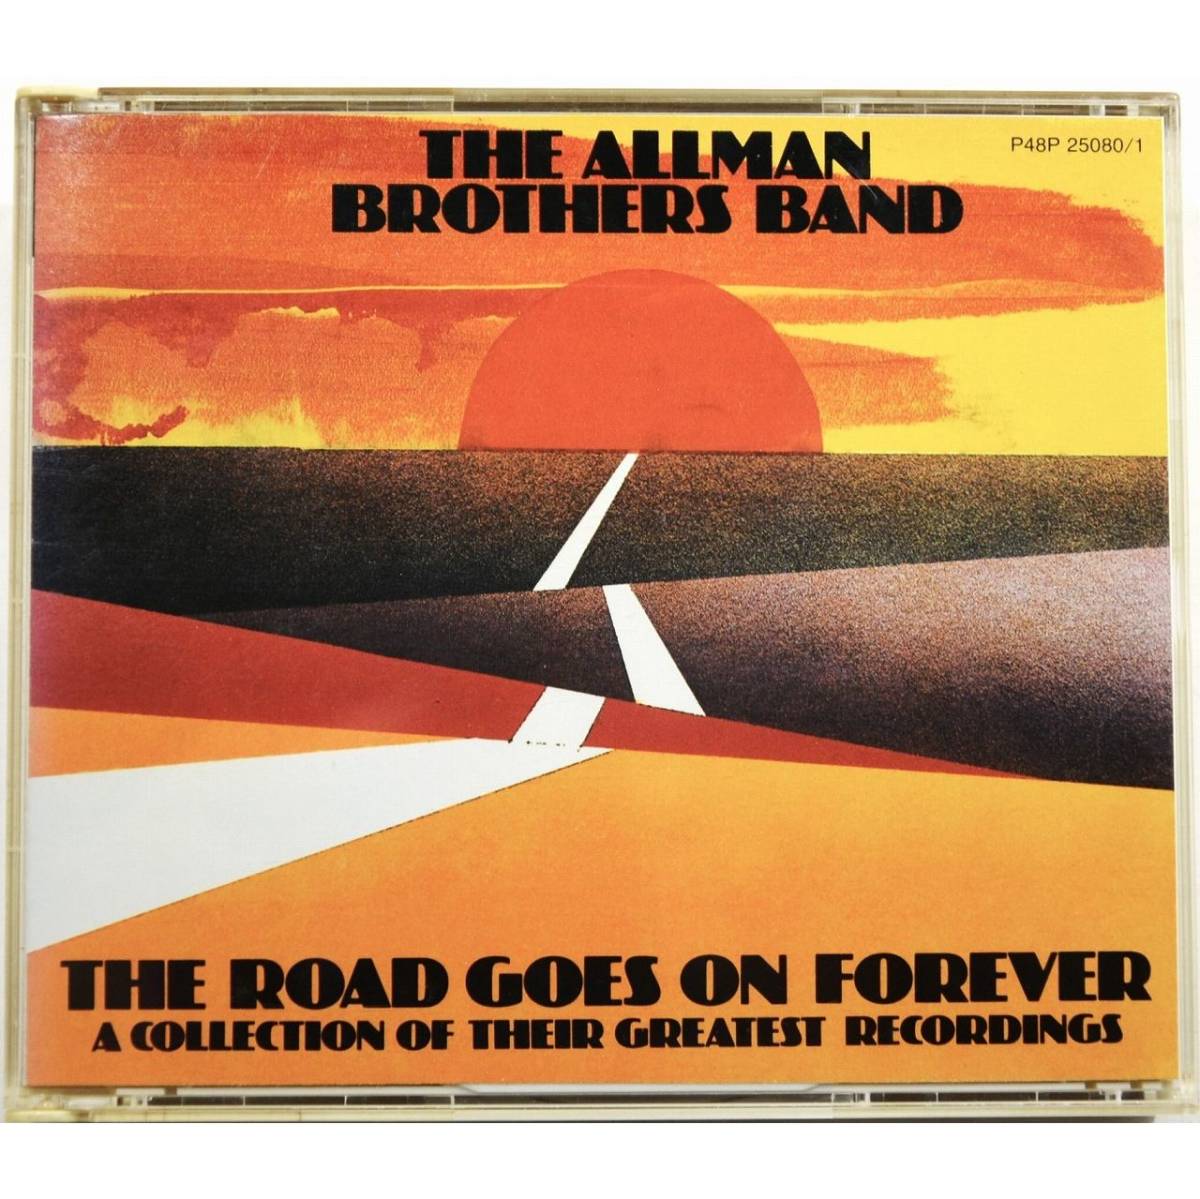 【2CD】The Allman Brothers Band / The Road Goes On Forever ◇ オールマン・ブラザーズ・バンド ◇ 栄光への道のり ◇ 国内盤 ◇_画像1